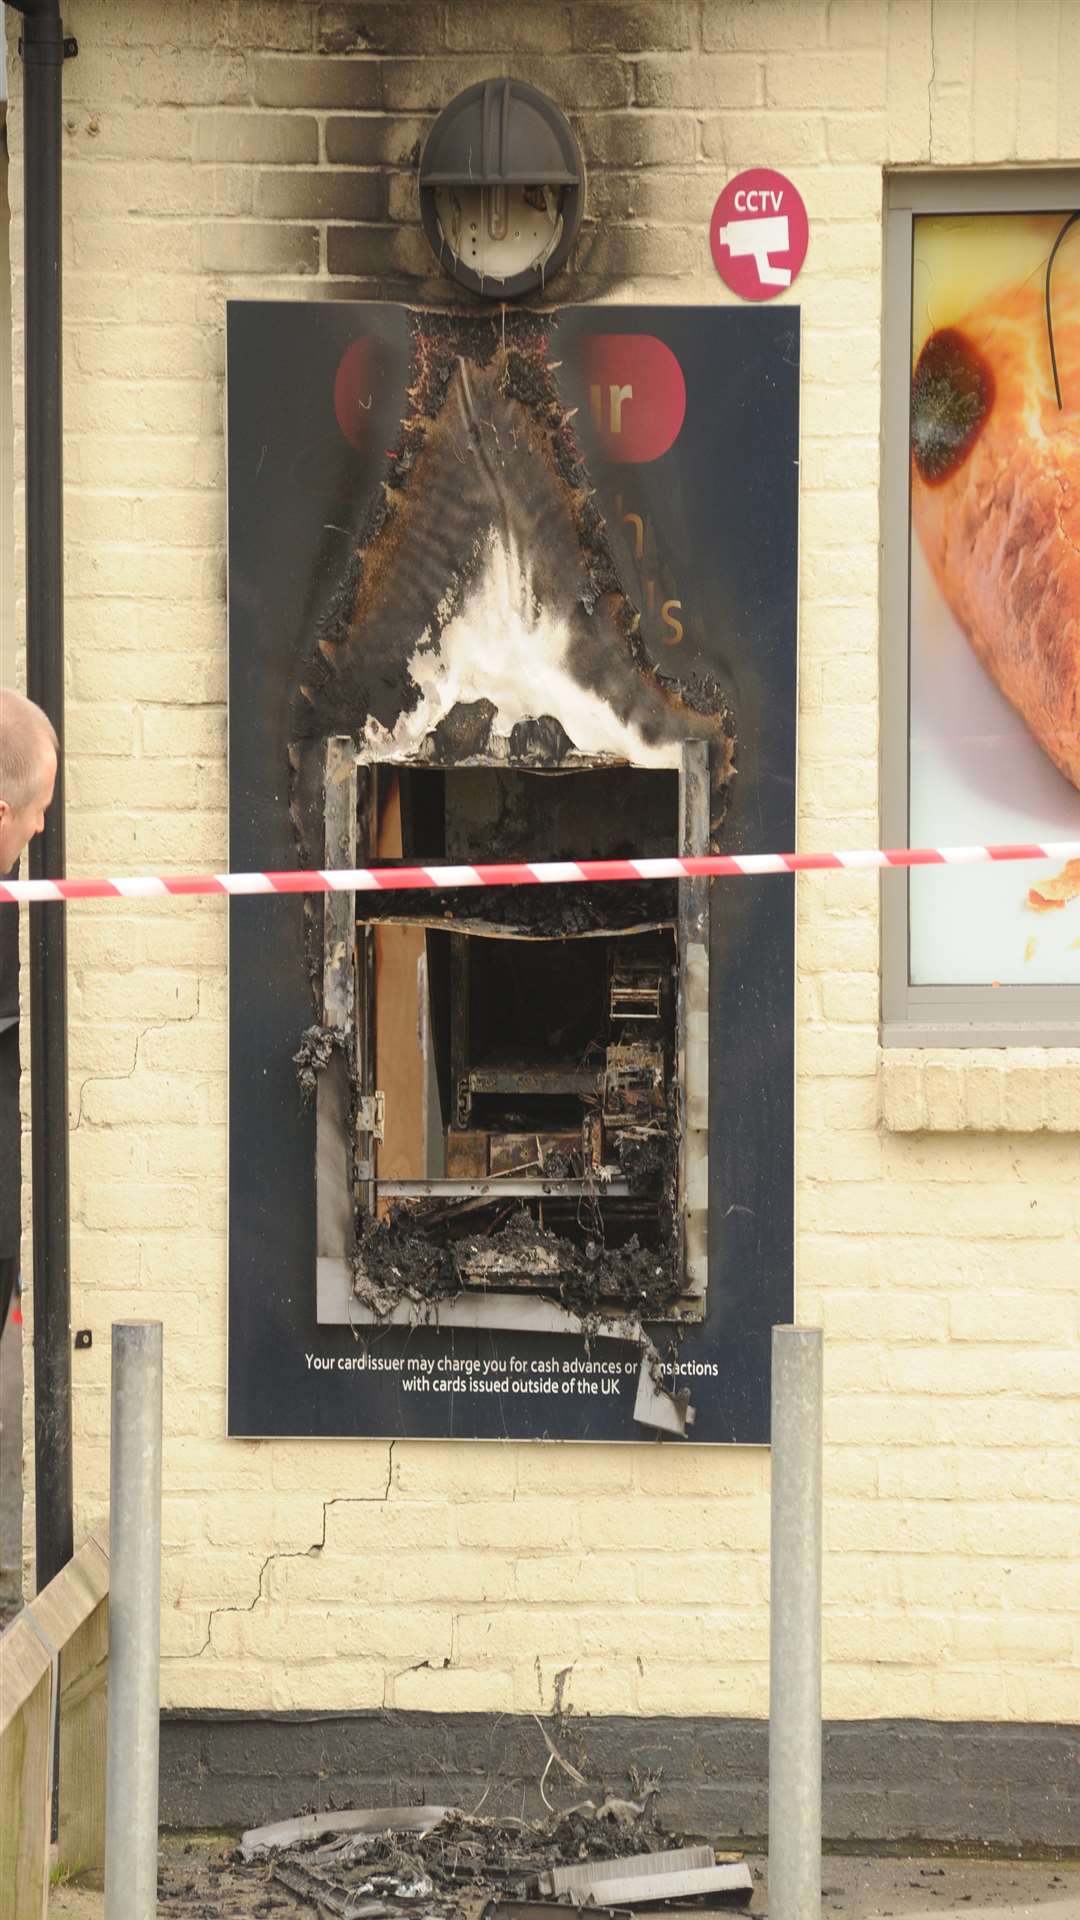 The cash machine was blown up during a gas explosion